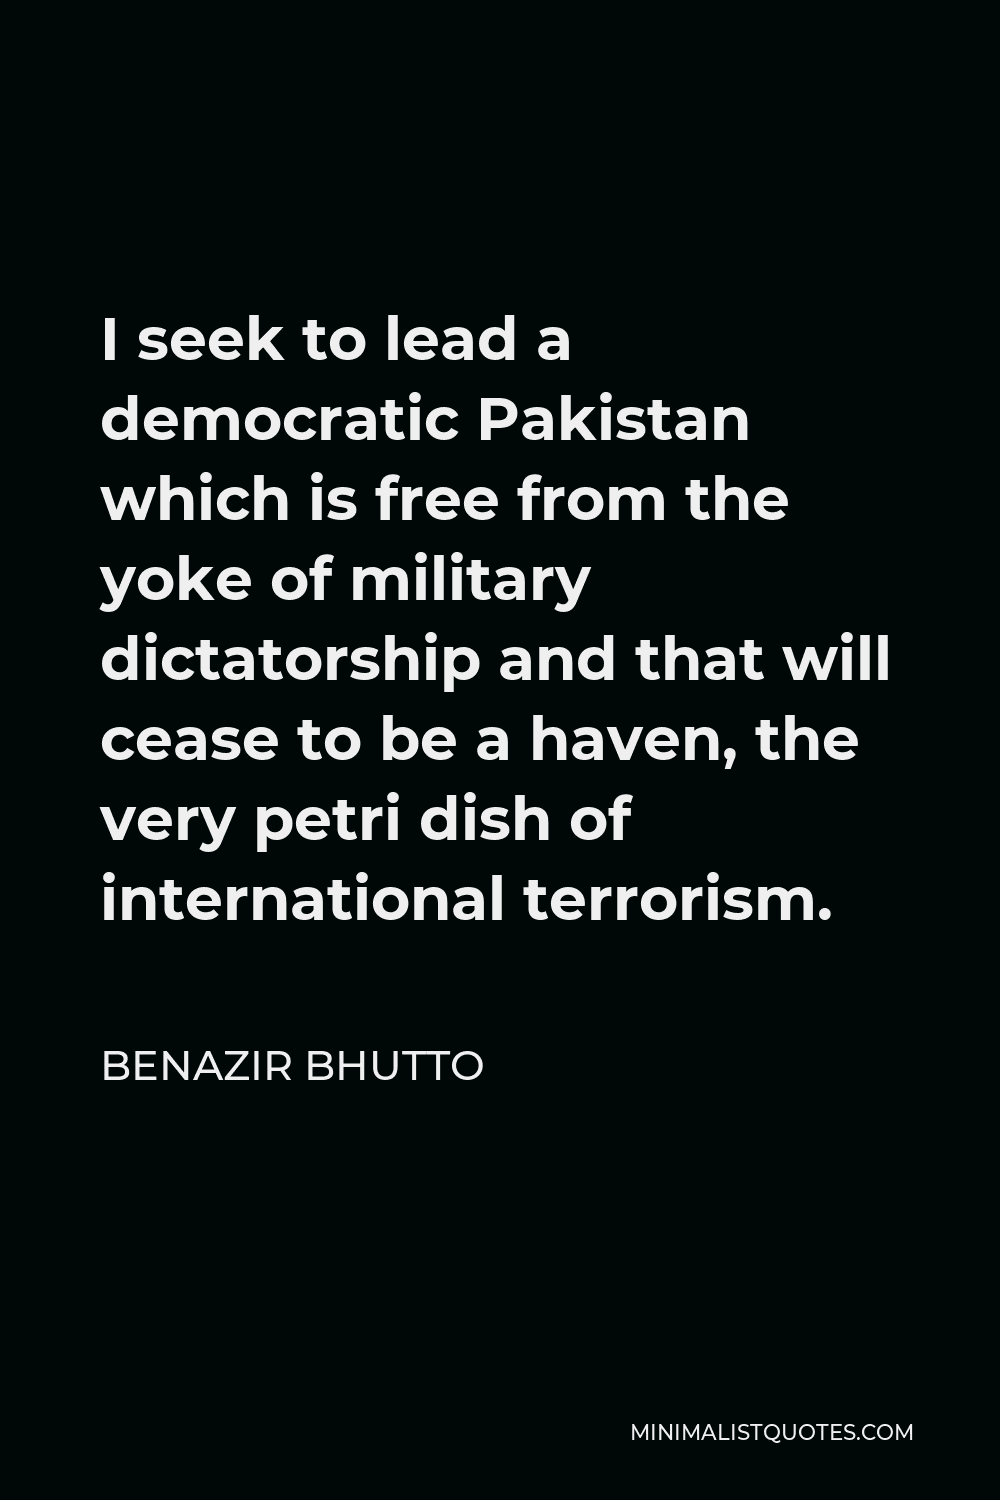 Benazir Bhutto Quote - I seek to lead a democratic Pakistan which is free from the yoke of military dictatorship and that will cease to be a haven, the very petri dish of international terrorism.